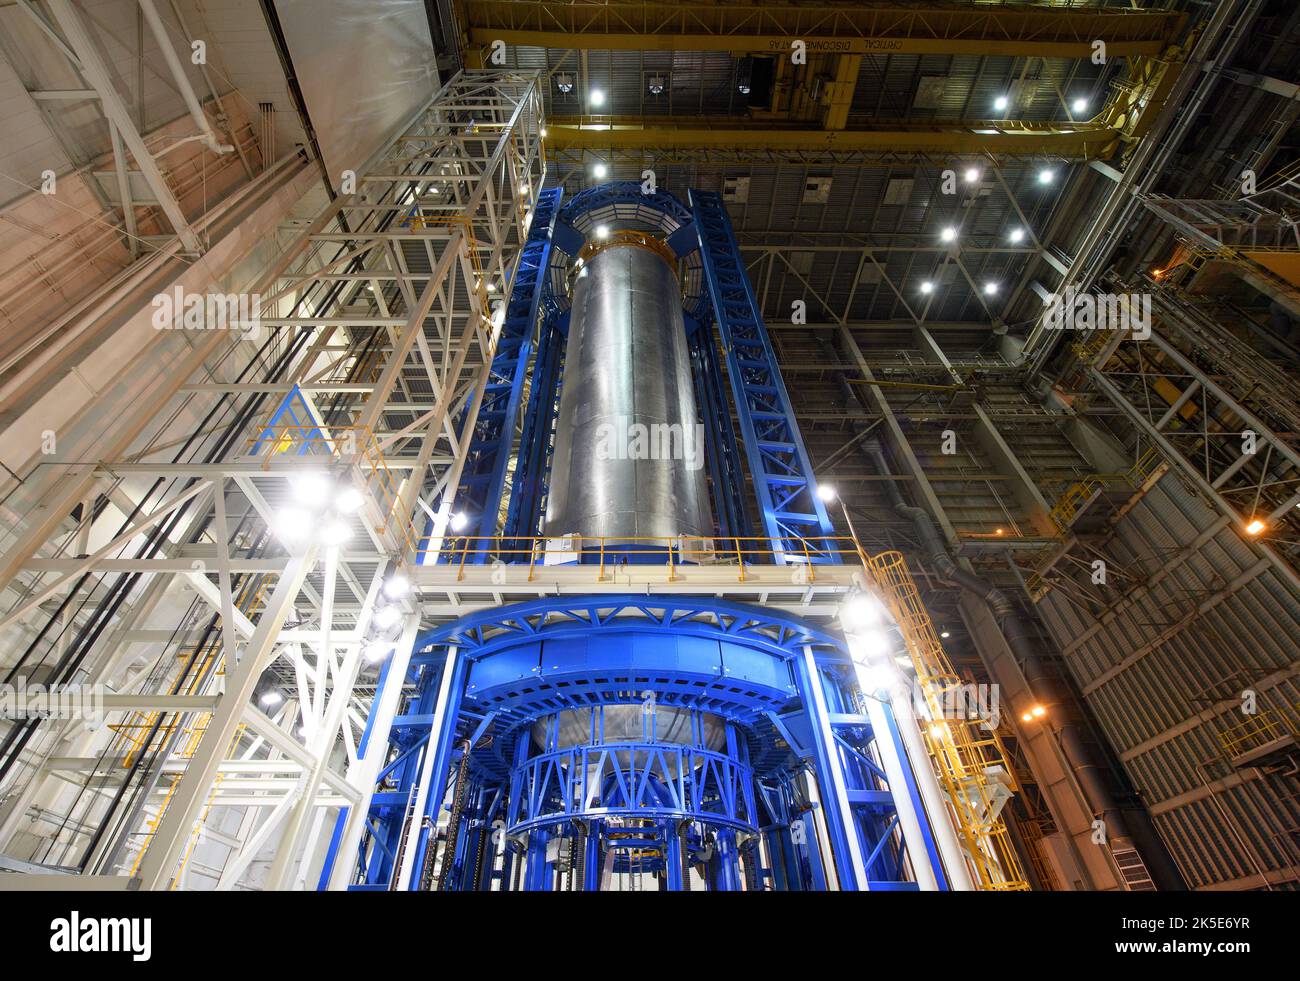 Engineers just completed welding the liquid hydrogen tank that will provide fuel for the first Space Launch System (SLS) flight in 2018. The tank measures more than 130 feet tall, comprises almost two-thirds of the core stage and holds 537,000 gallons of liquid hydrogen -- which is cooled to minus 423 degrees Fahrenheit. A unique version of an original NASA image. Credit: NASA/EBordelon Stock Photo